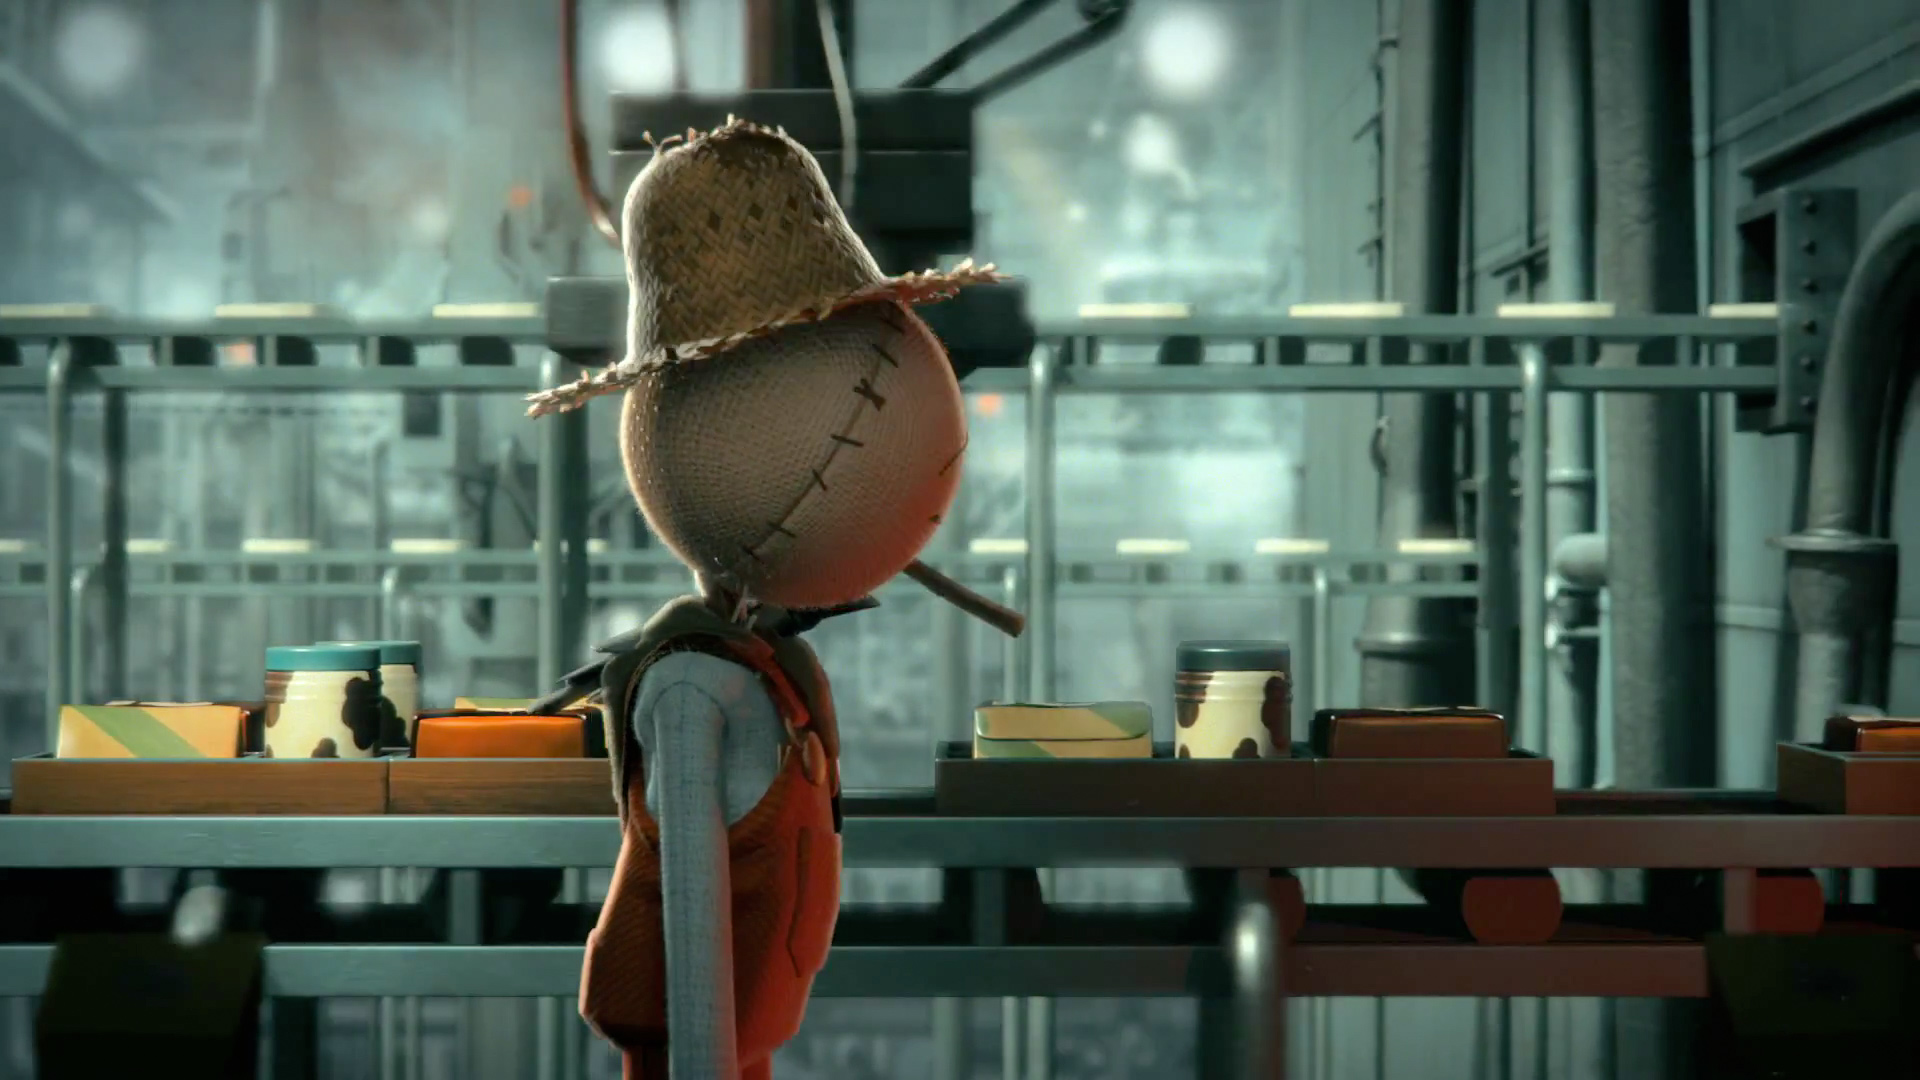 chipotle-creates-great-animated-short-film-the-scarecrow-5.jpg